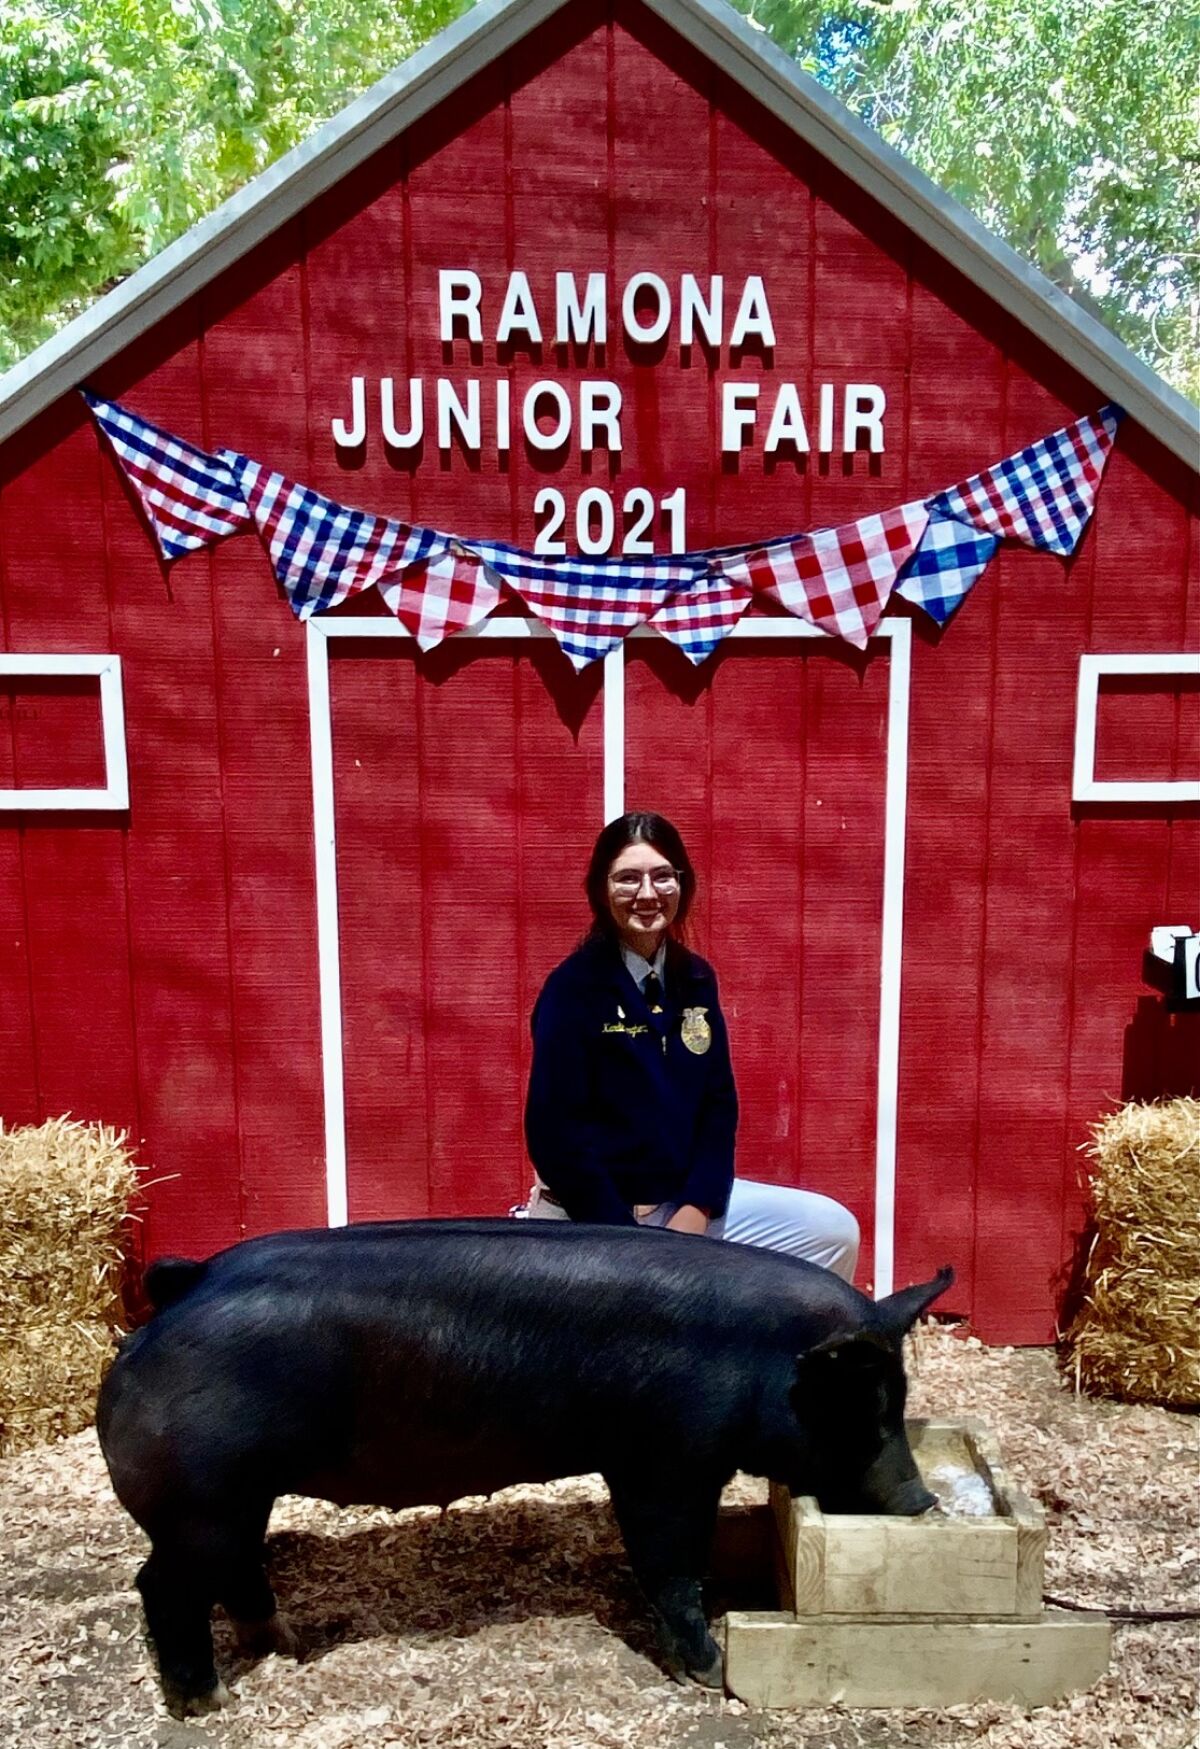 Ramona Junior Fair offers competition but also lots of fun agricultural